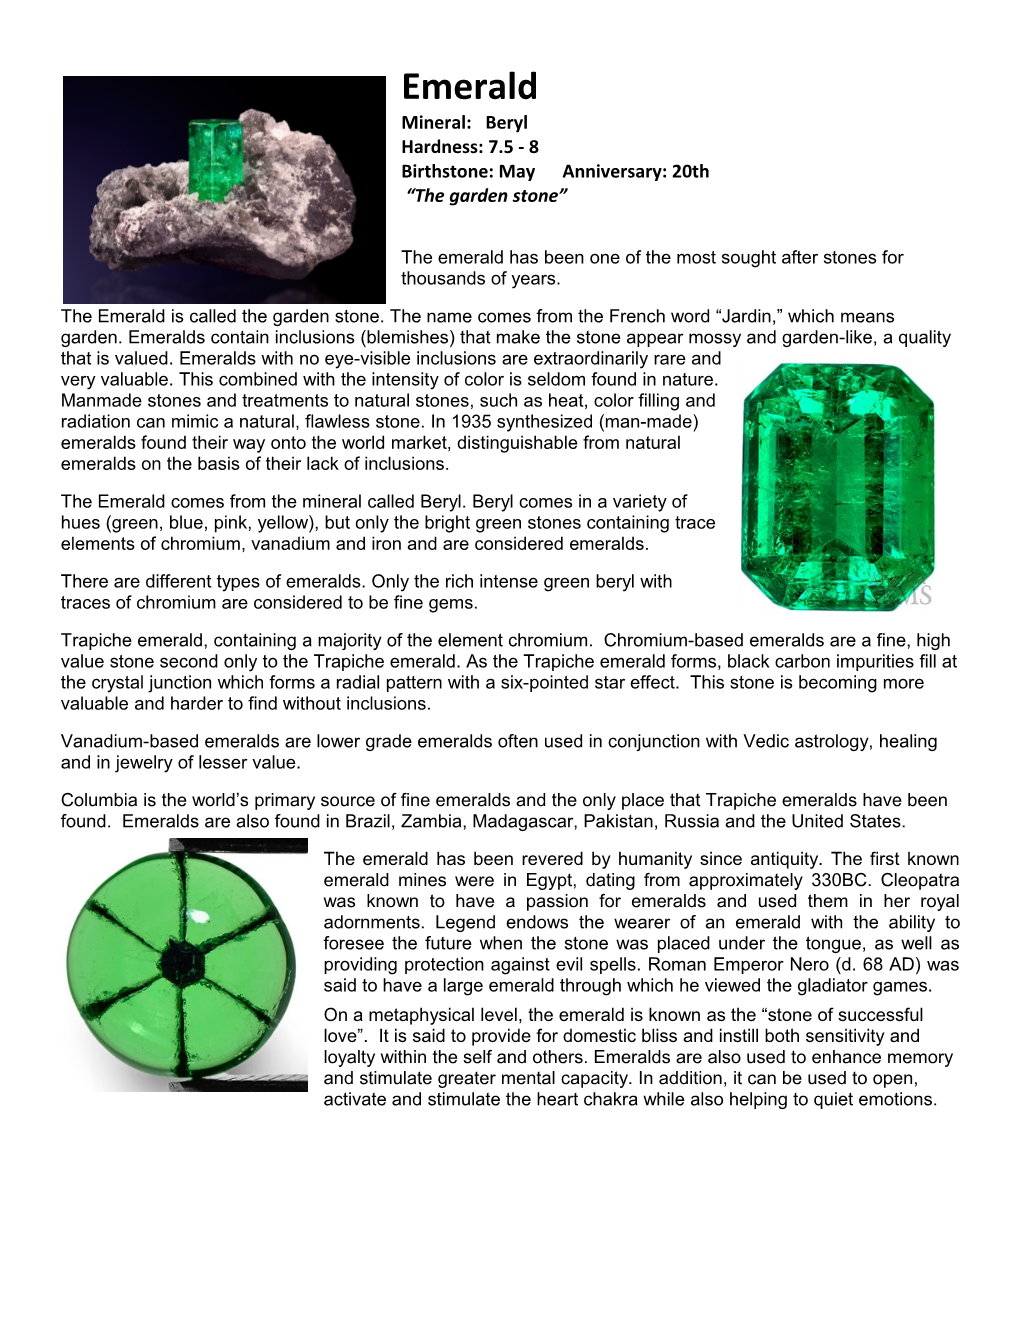 The Emerald Has Been One of the Most Sought After Stones for Thousands of Years